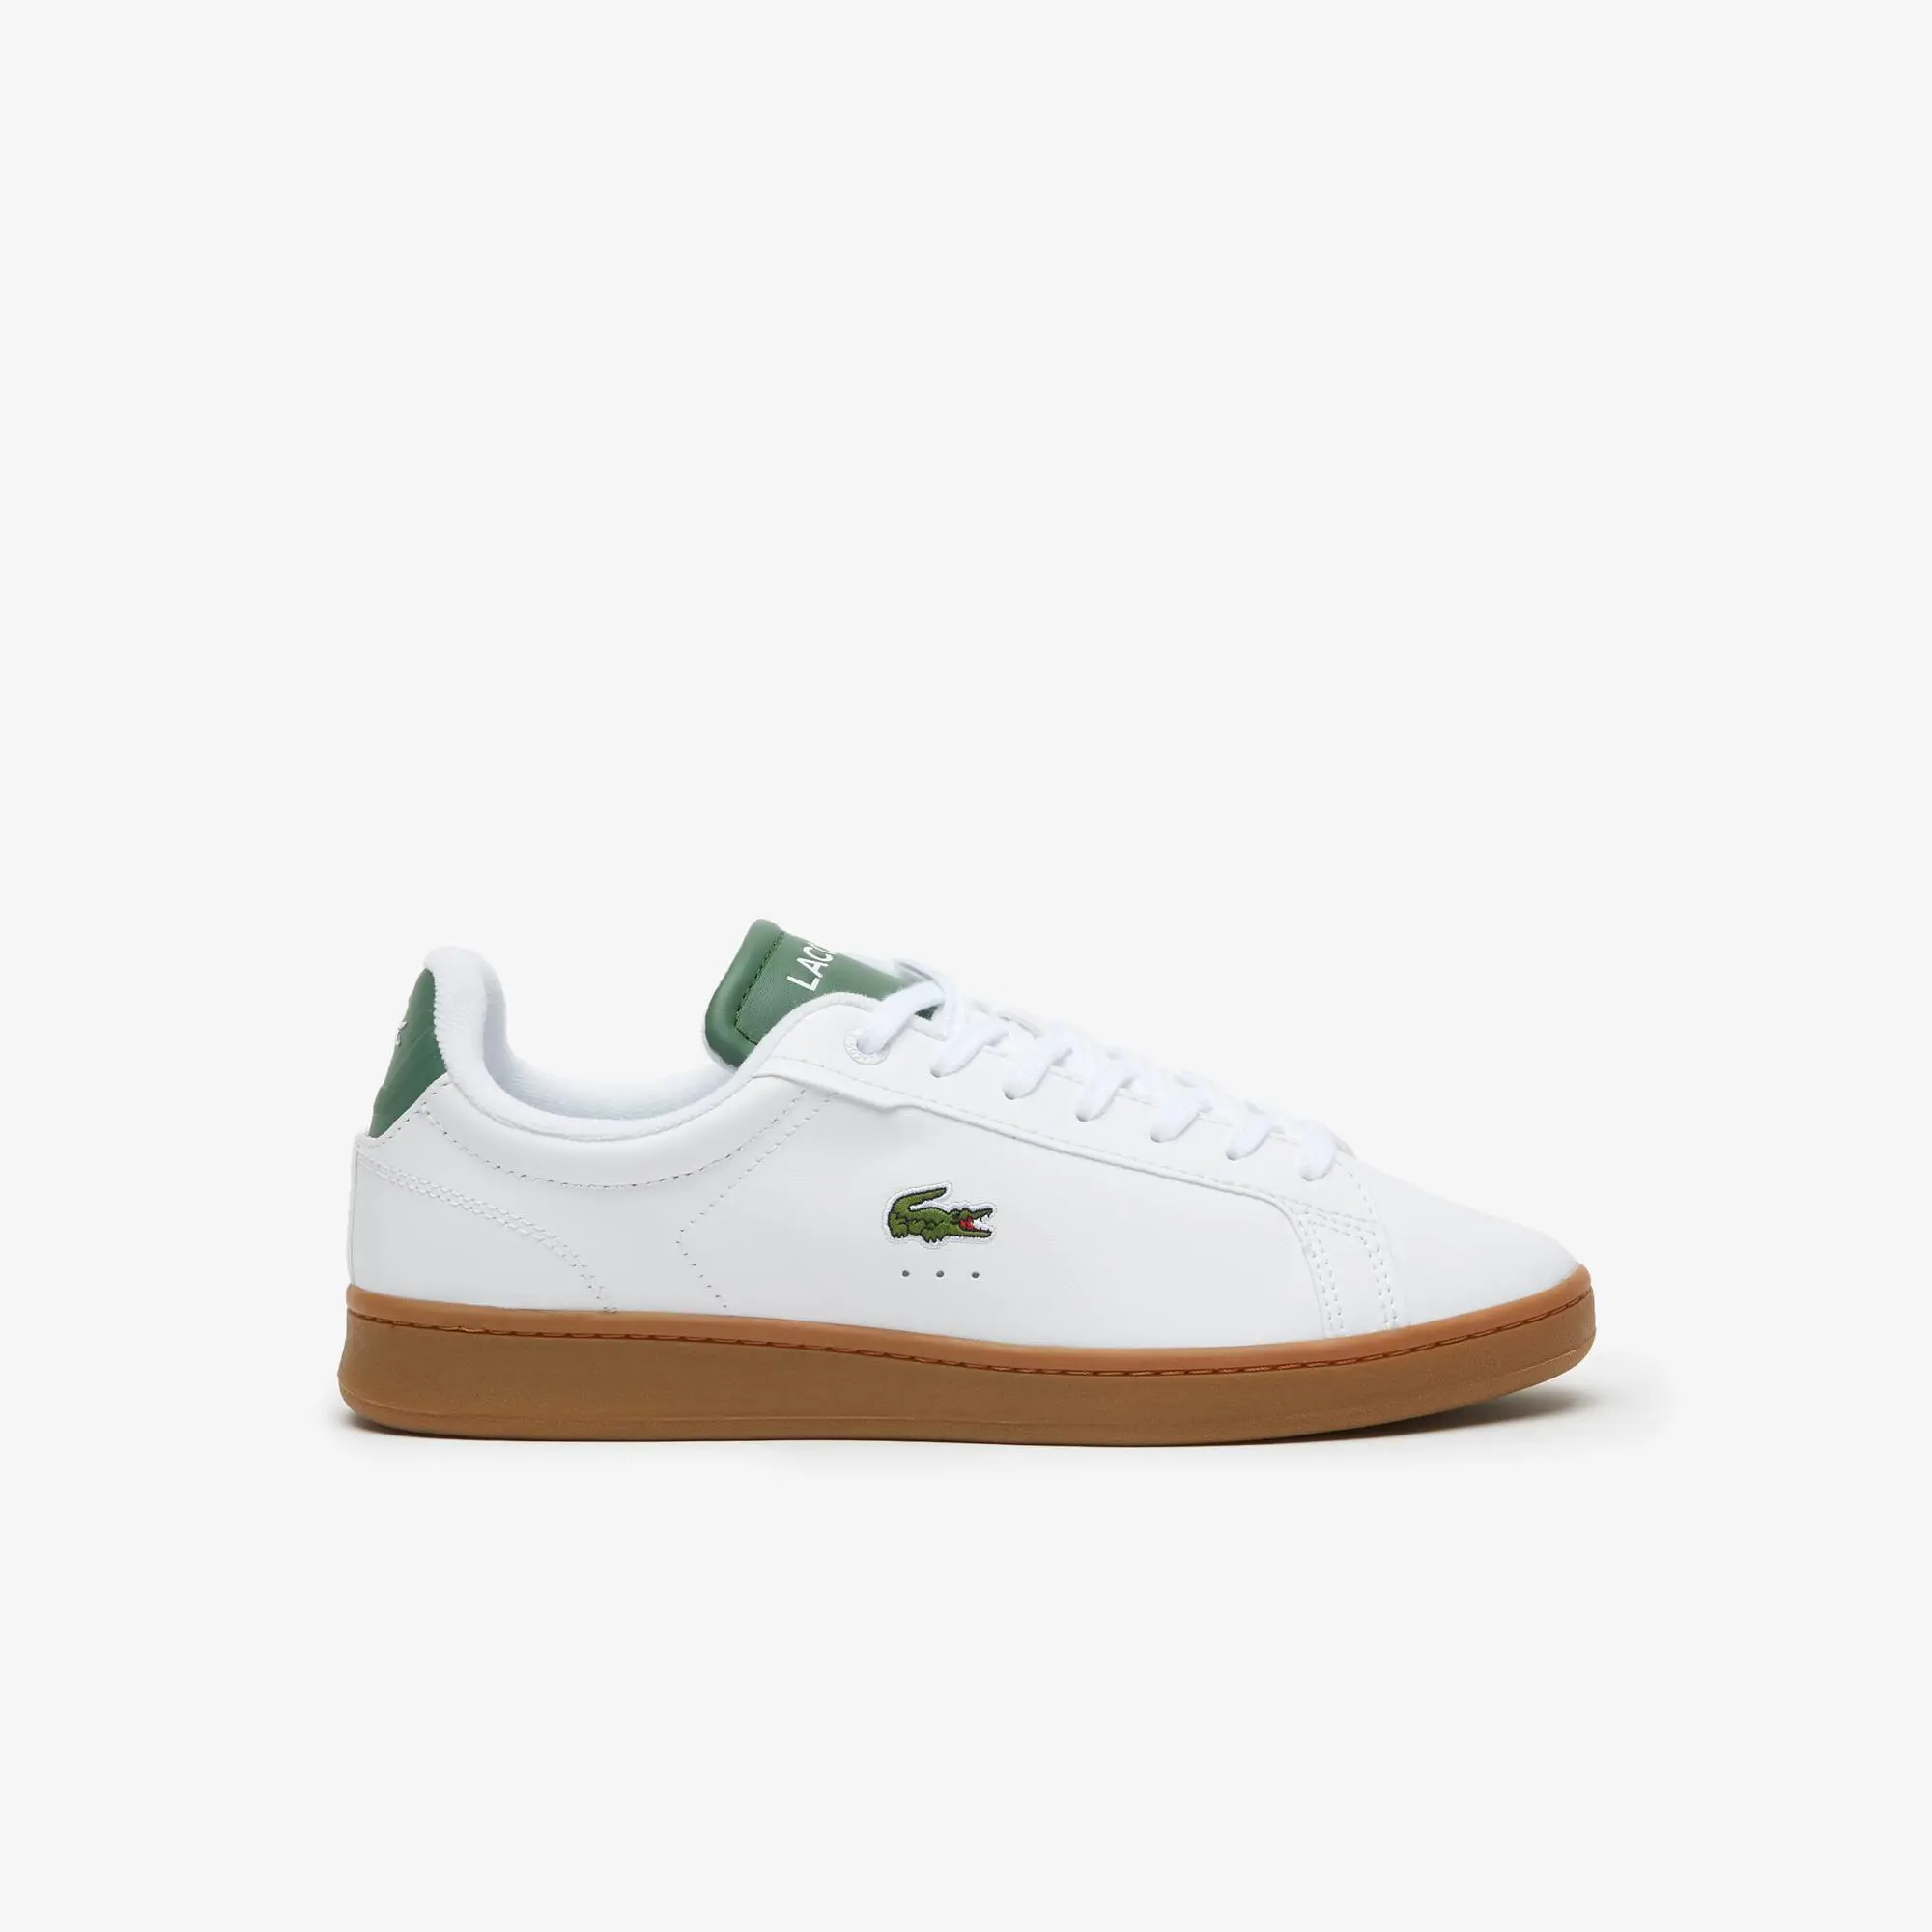 Lacoste Men's Lacoste Carnaby Pro Leather Trainers. 1